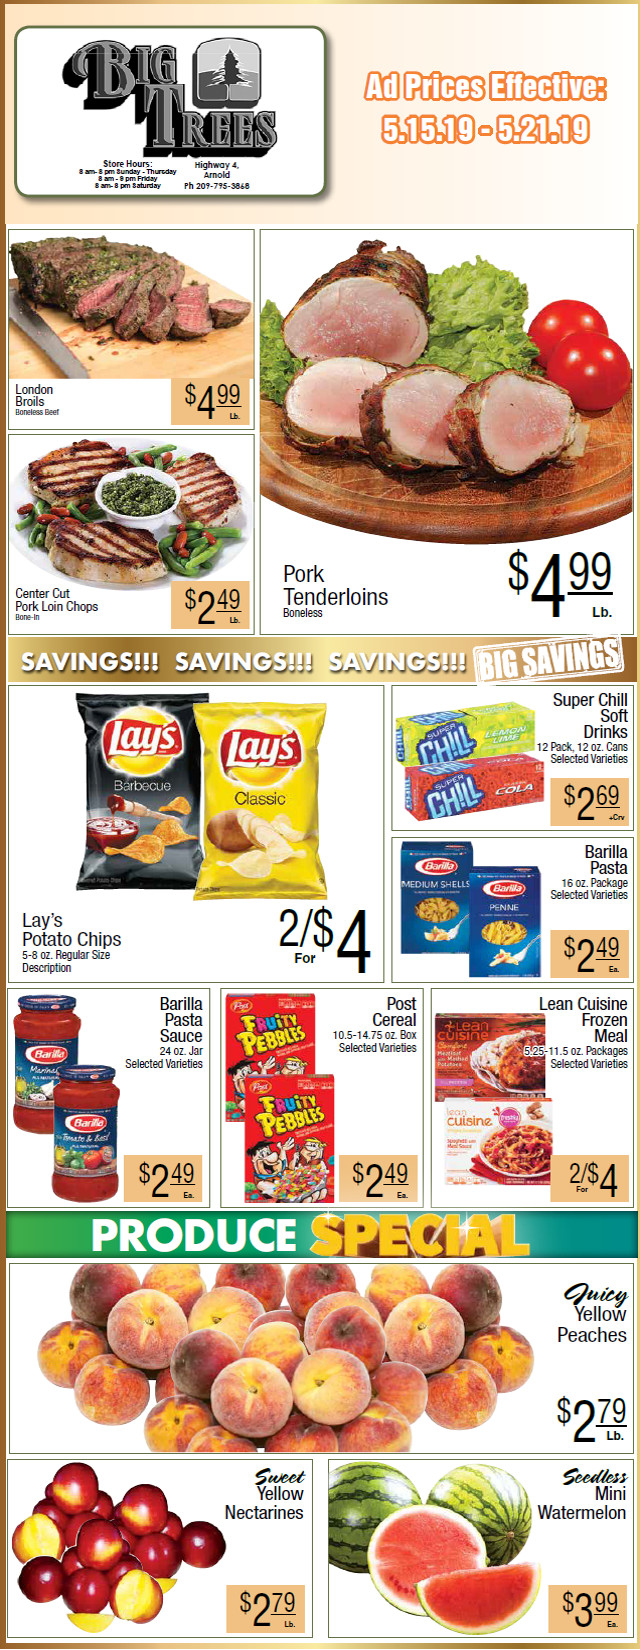 Big Trees Market Weekly Ad & Grocery Specials Though May 21st